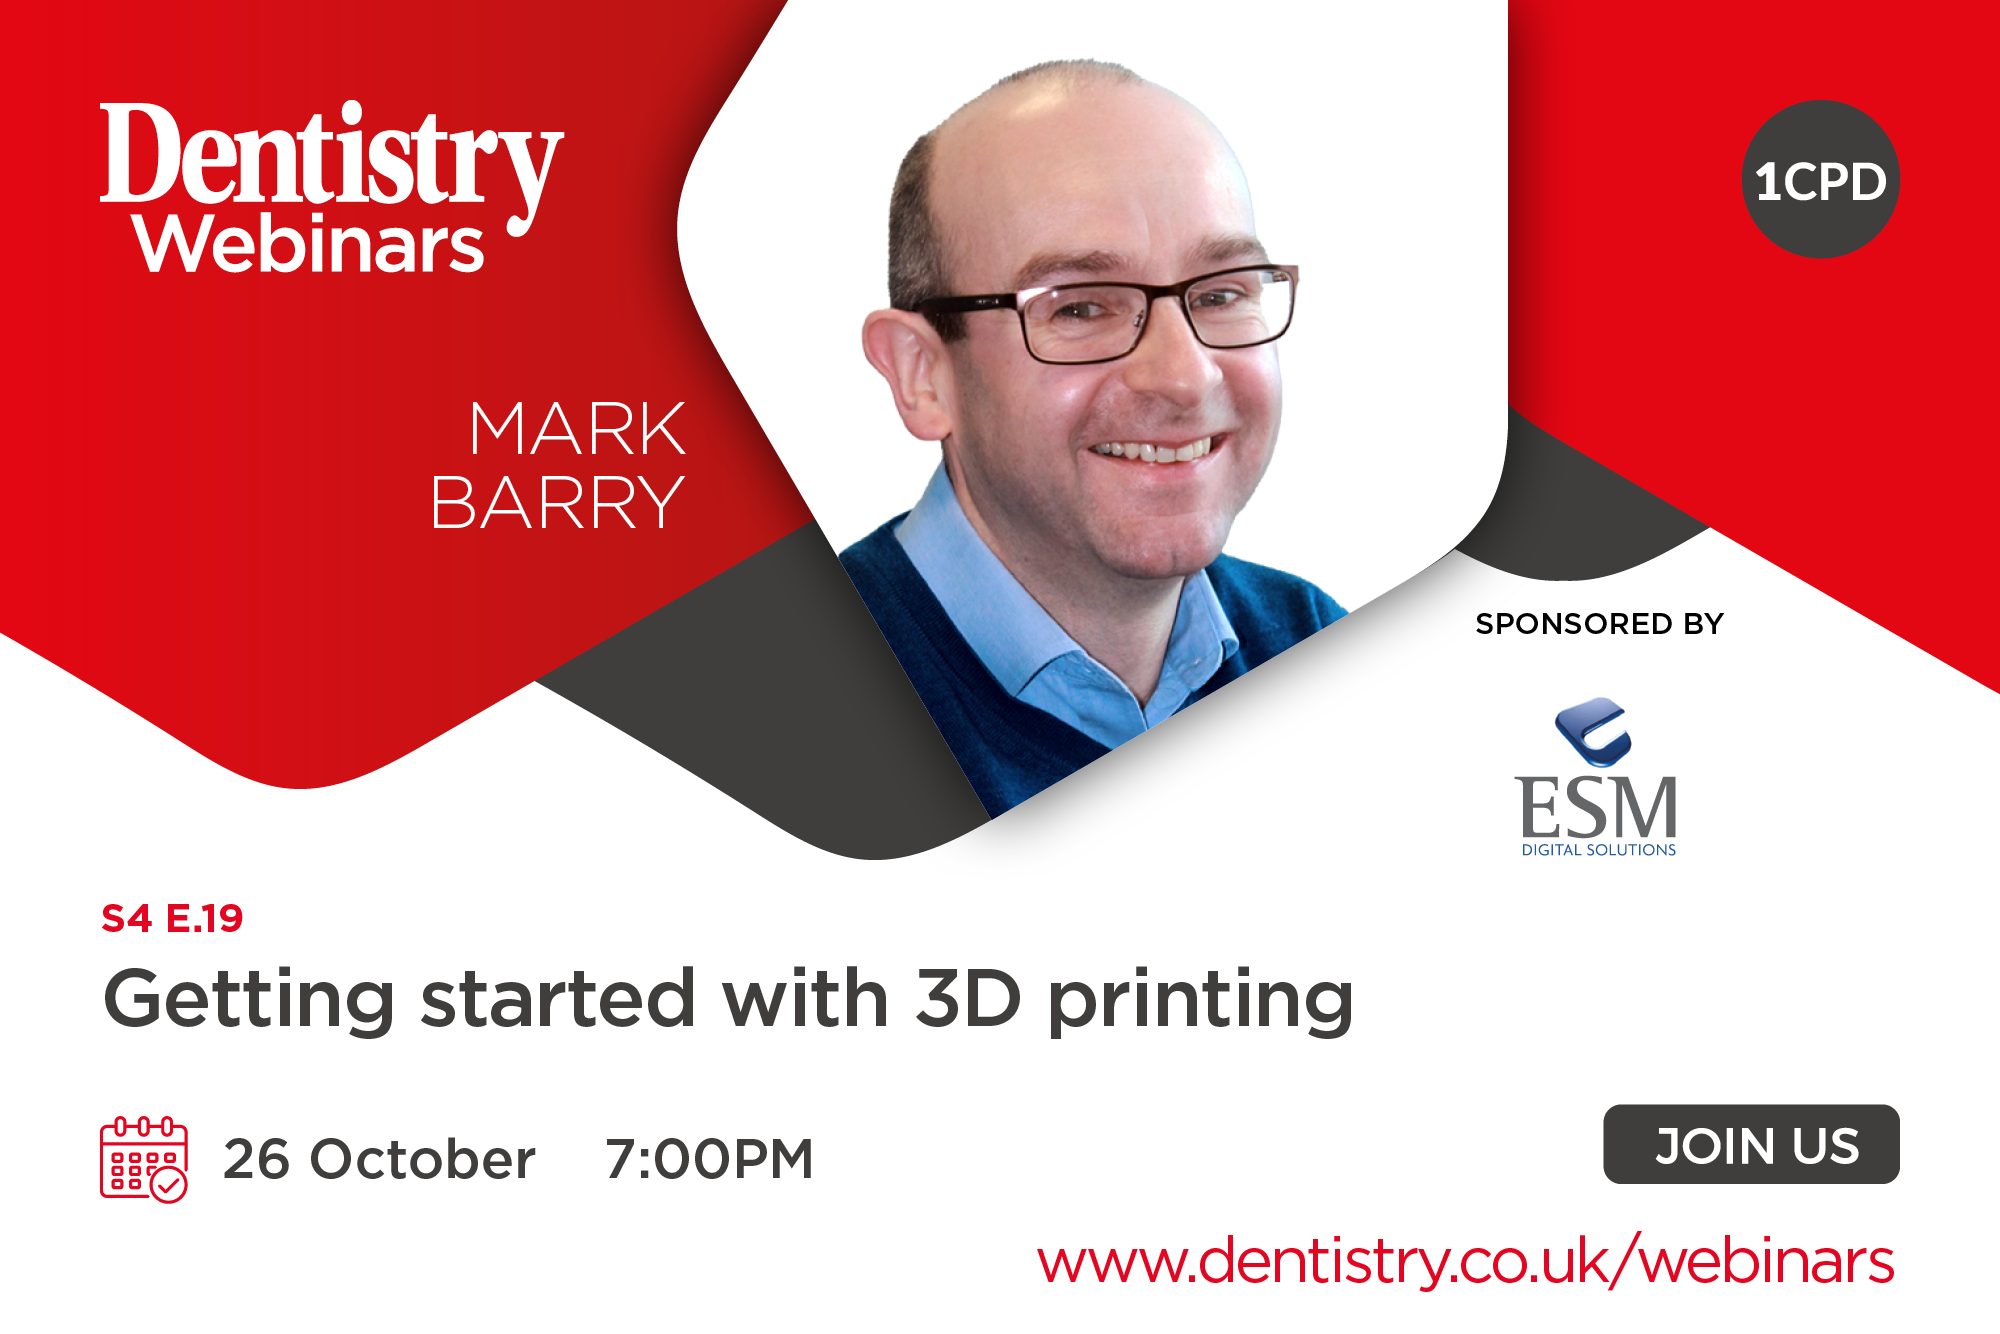 Join Mark Barry on Thursday 26 October at 7pm as he discusses getting started with 3D printing – sign up now.